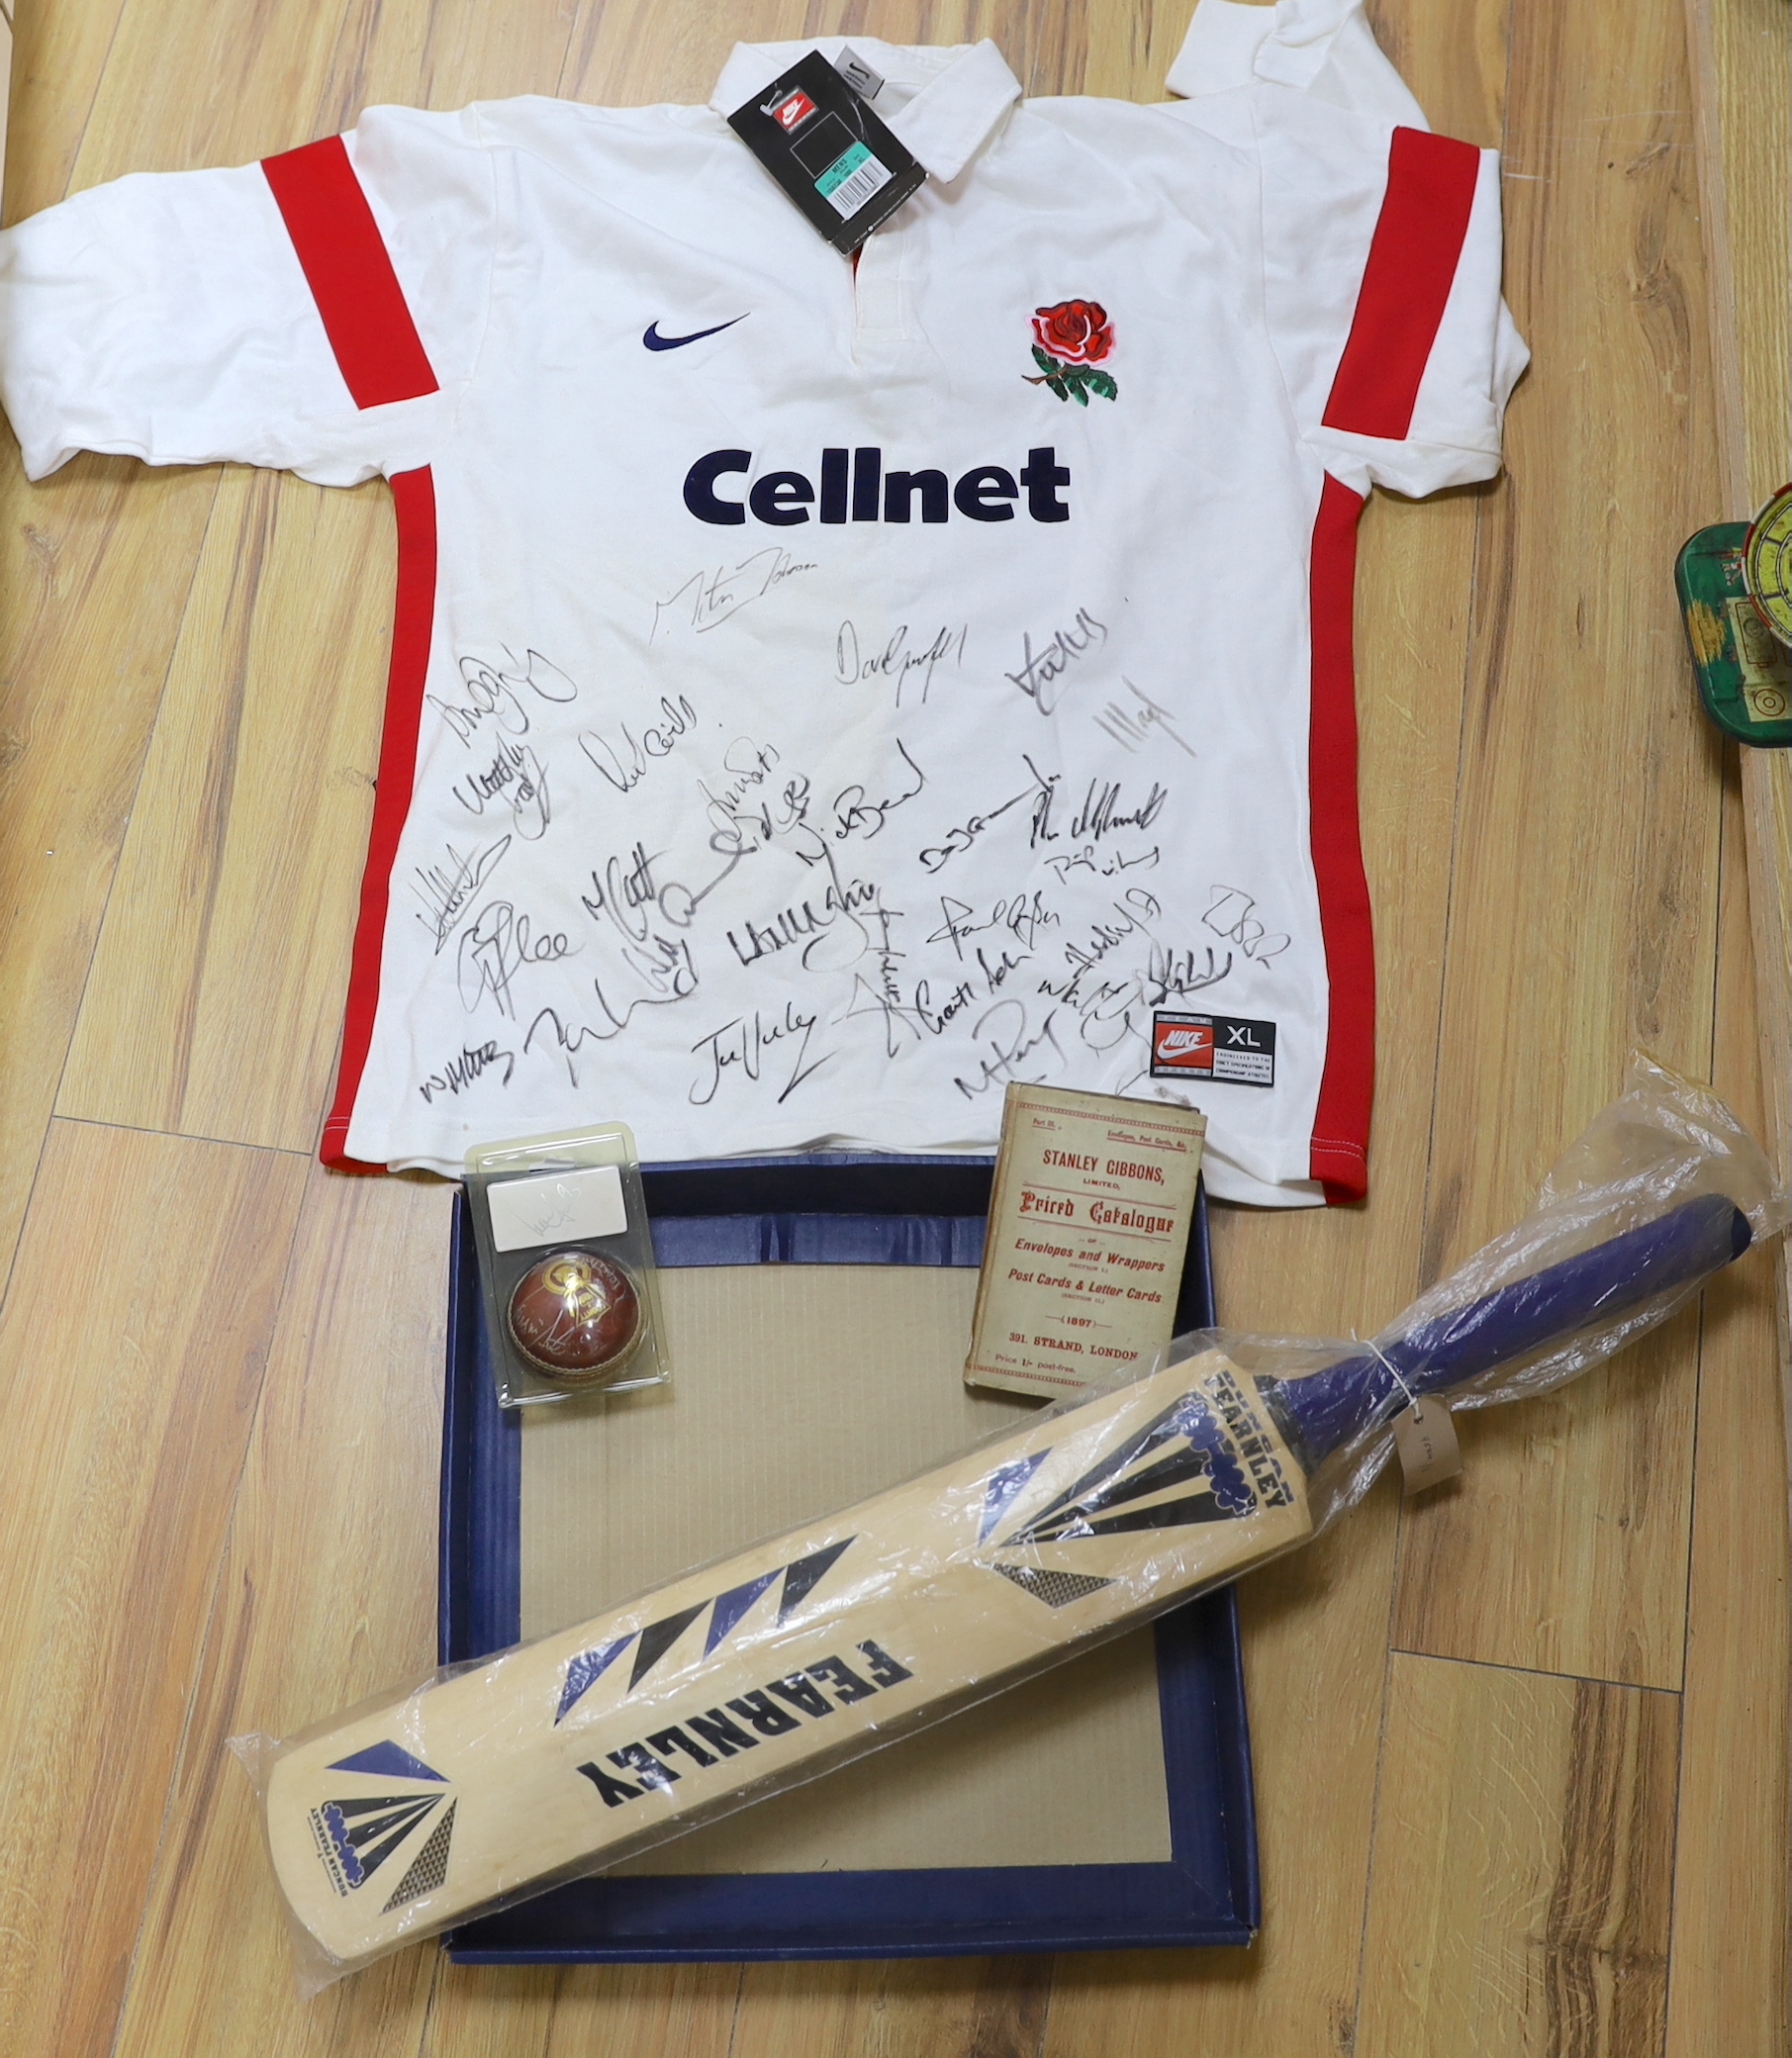 An autographed England rugby shirt, a similar England -v- South Africa 1998 Test Series cricket bat and a cricket ball